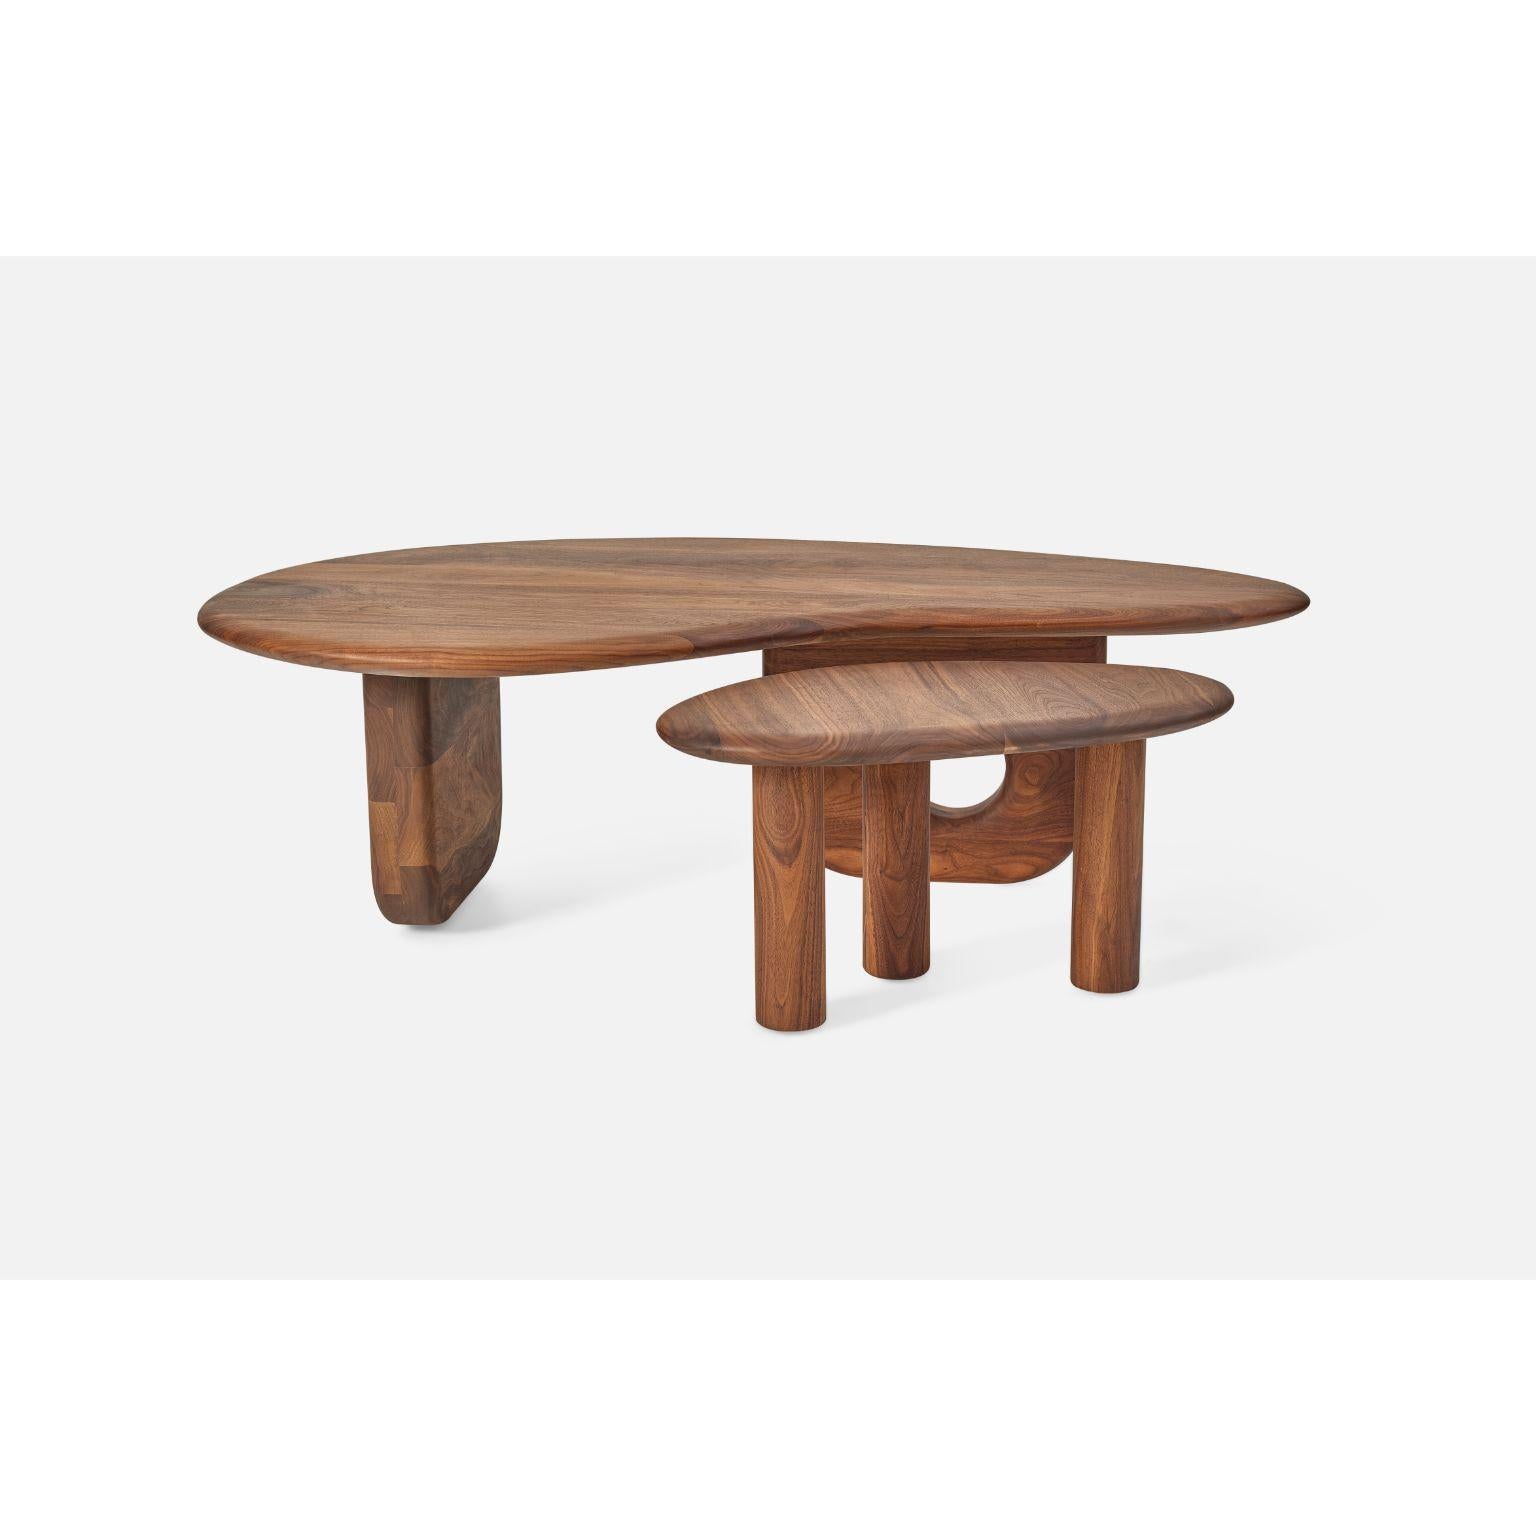 Double Zilan Low Table M by Contemporary Ecowood
Dimensions: Main Table: W 84 x D 150 x H 41 cm.
Portable: W 68 x D 37 x H 14 cm
Materials: American Clora Walnut.
Color: Natural.

Contemporary Ecowood’s story began in a craft workshop in 2009. Our